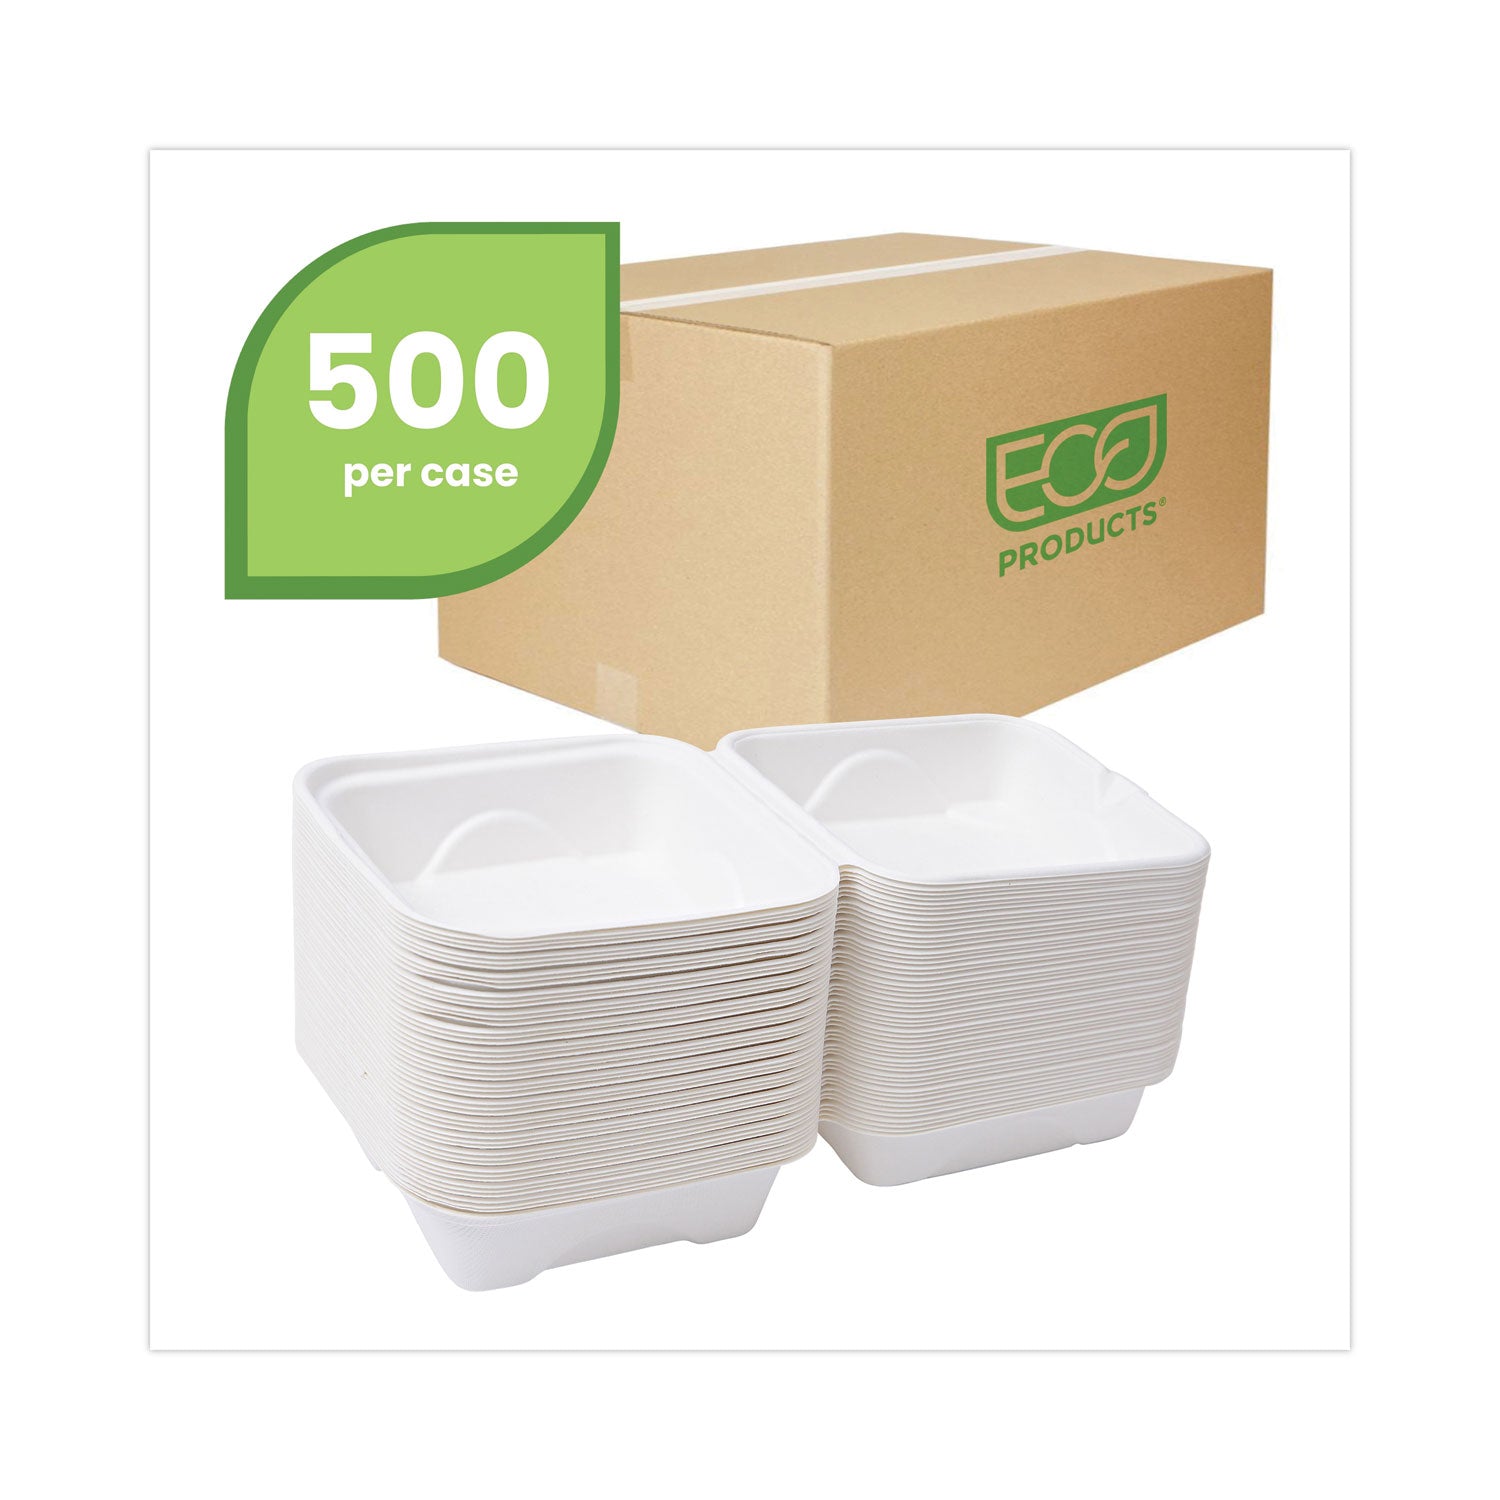 bagasse-hinged-clamshell-containers-6-x-6-x-3-white-sugarcane-50-pack-10-packs-carton_ecoephc6 - 2